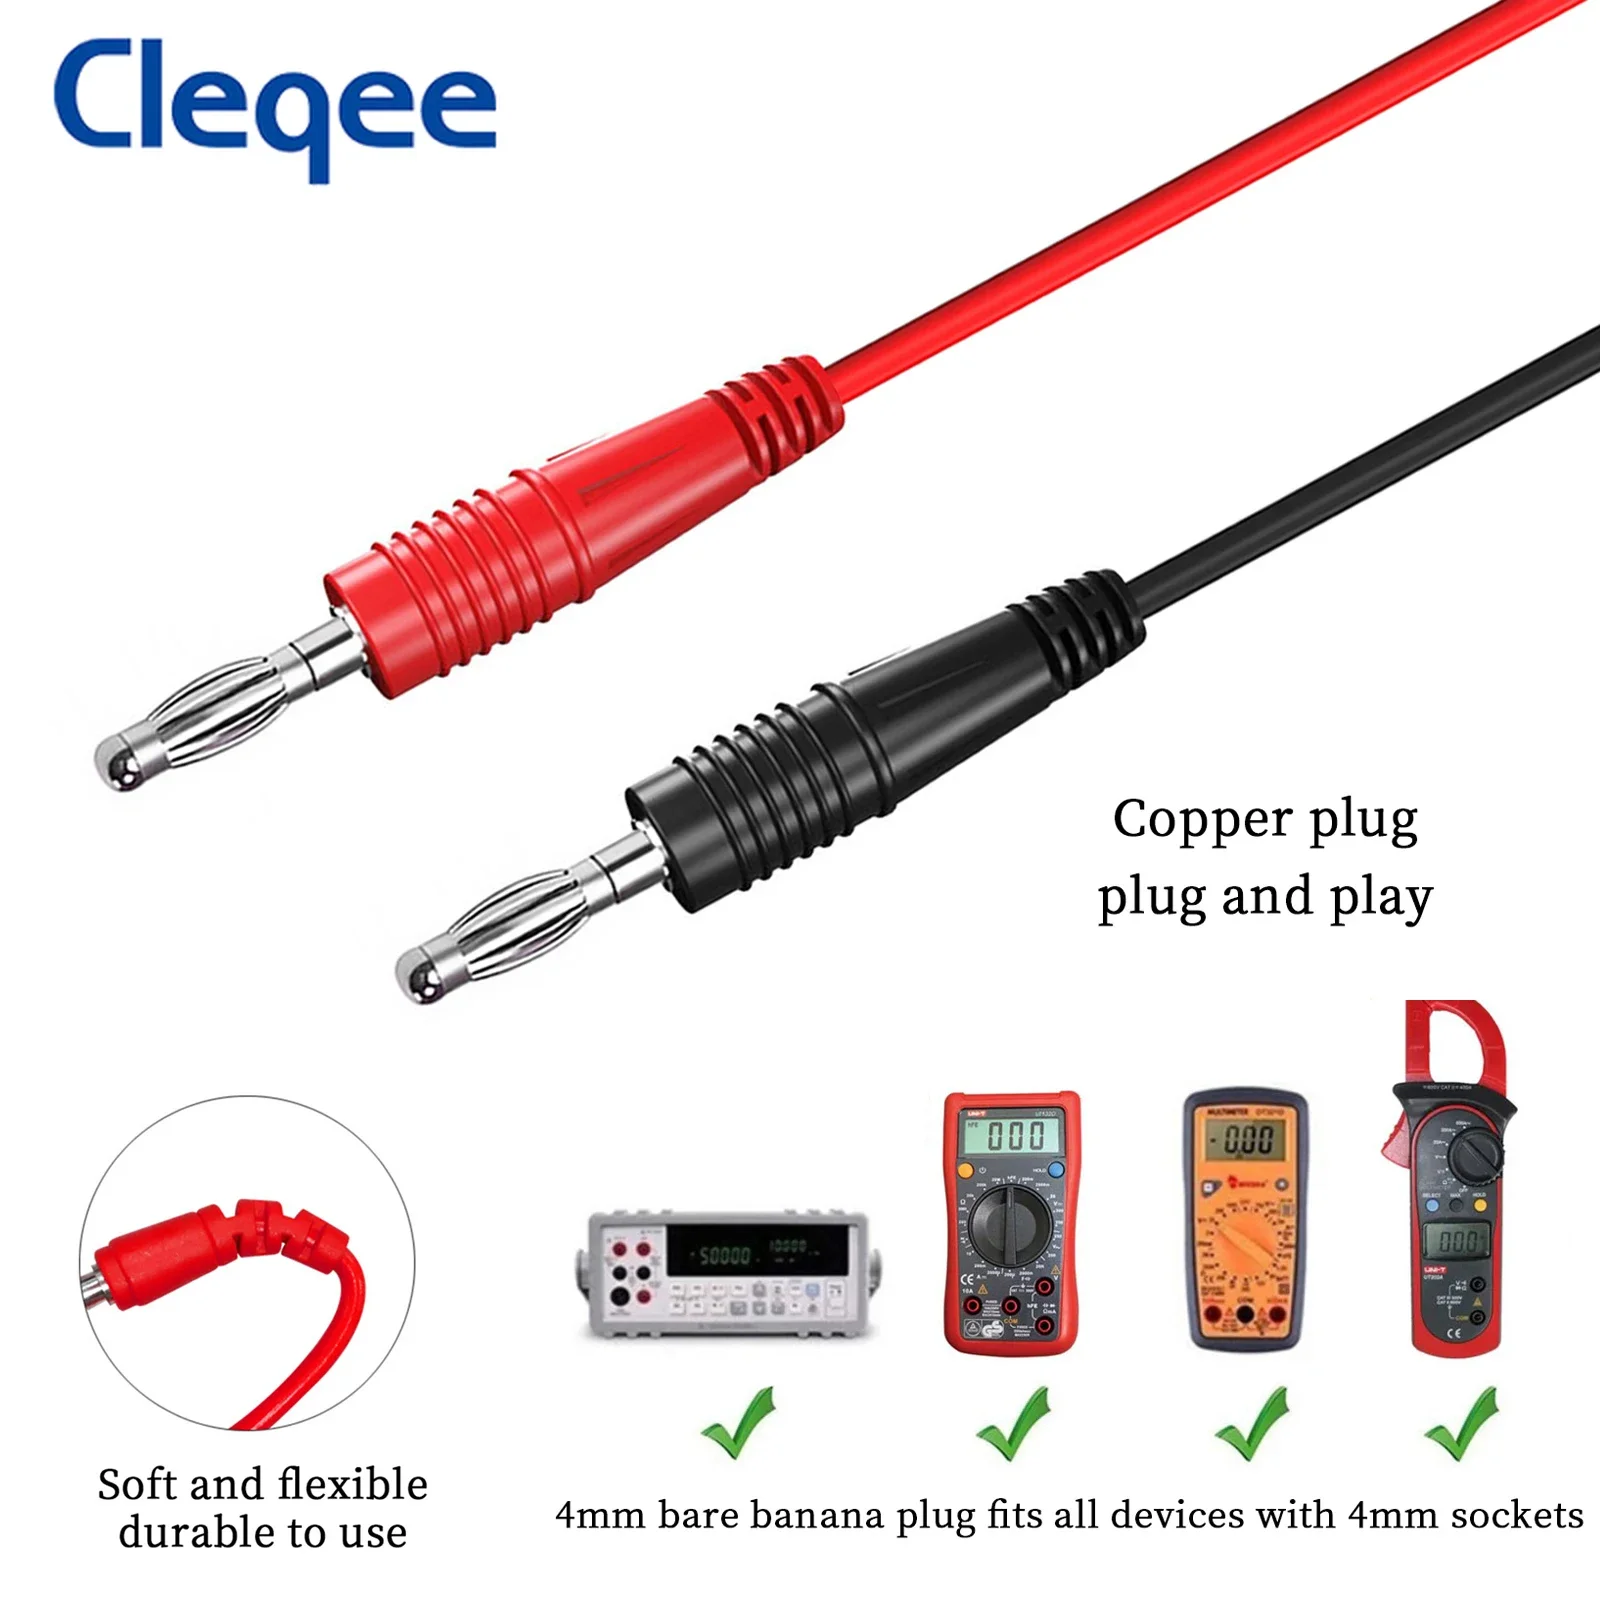 Test Lead Cable Multimeter  Multimeter Cable Banana Tests - P1032 4mm Plug  Test - Aliexpress